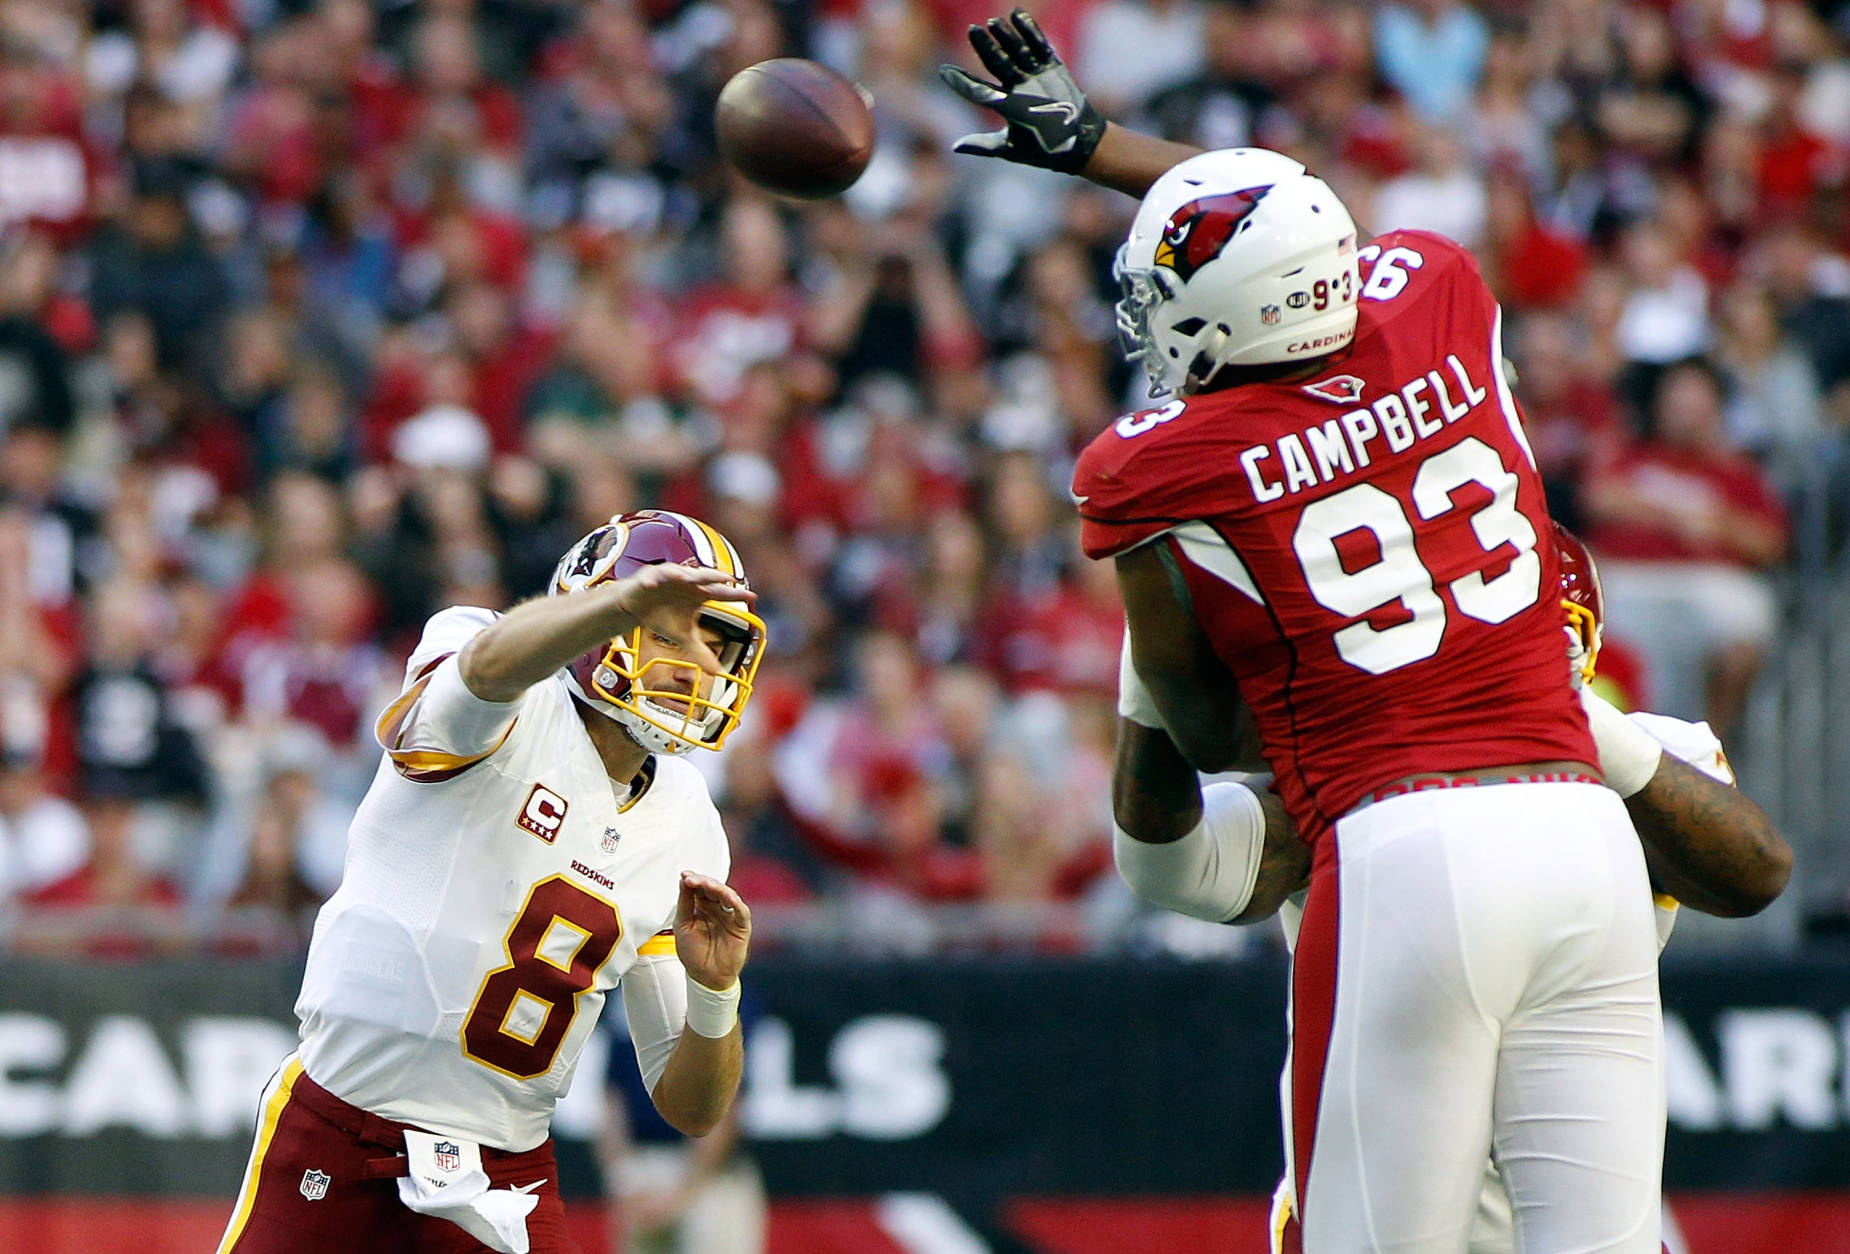 GLENDALE, AZ - DECEMBER 04:  Calais Campbell #93 of the Arizona Cardinals leaps to block the pass of quarterback Kurk Cousins #8 of the Washington Redskins during the first quarter of a game at University of Phoenix Stadium on December 4, 2016 in Glendale, Arizona.  (Photo by Ralph Freso/Getty Images)